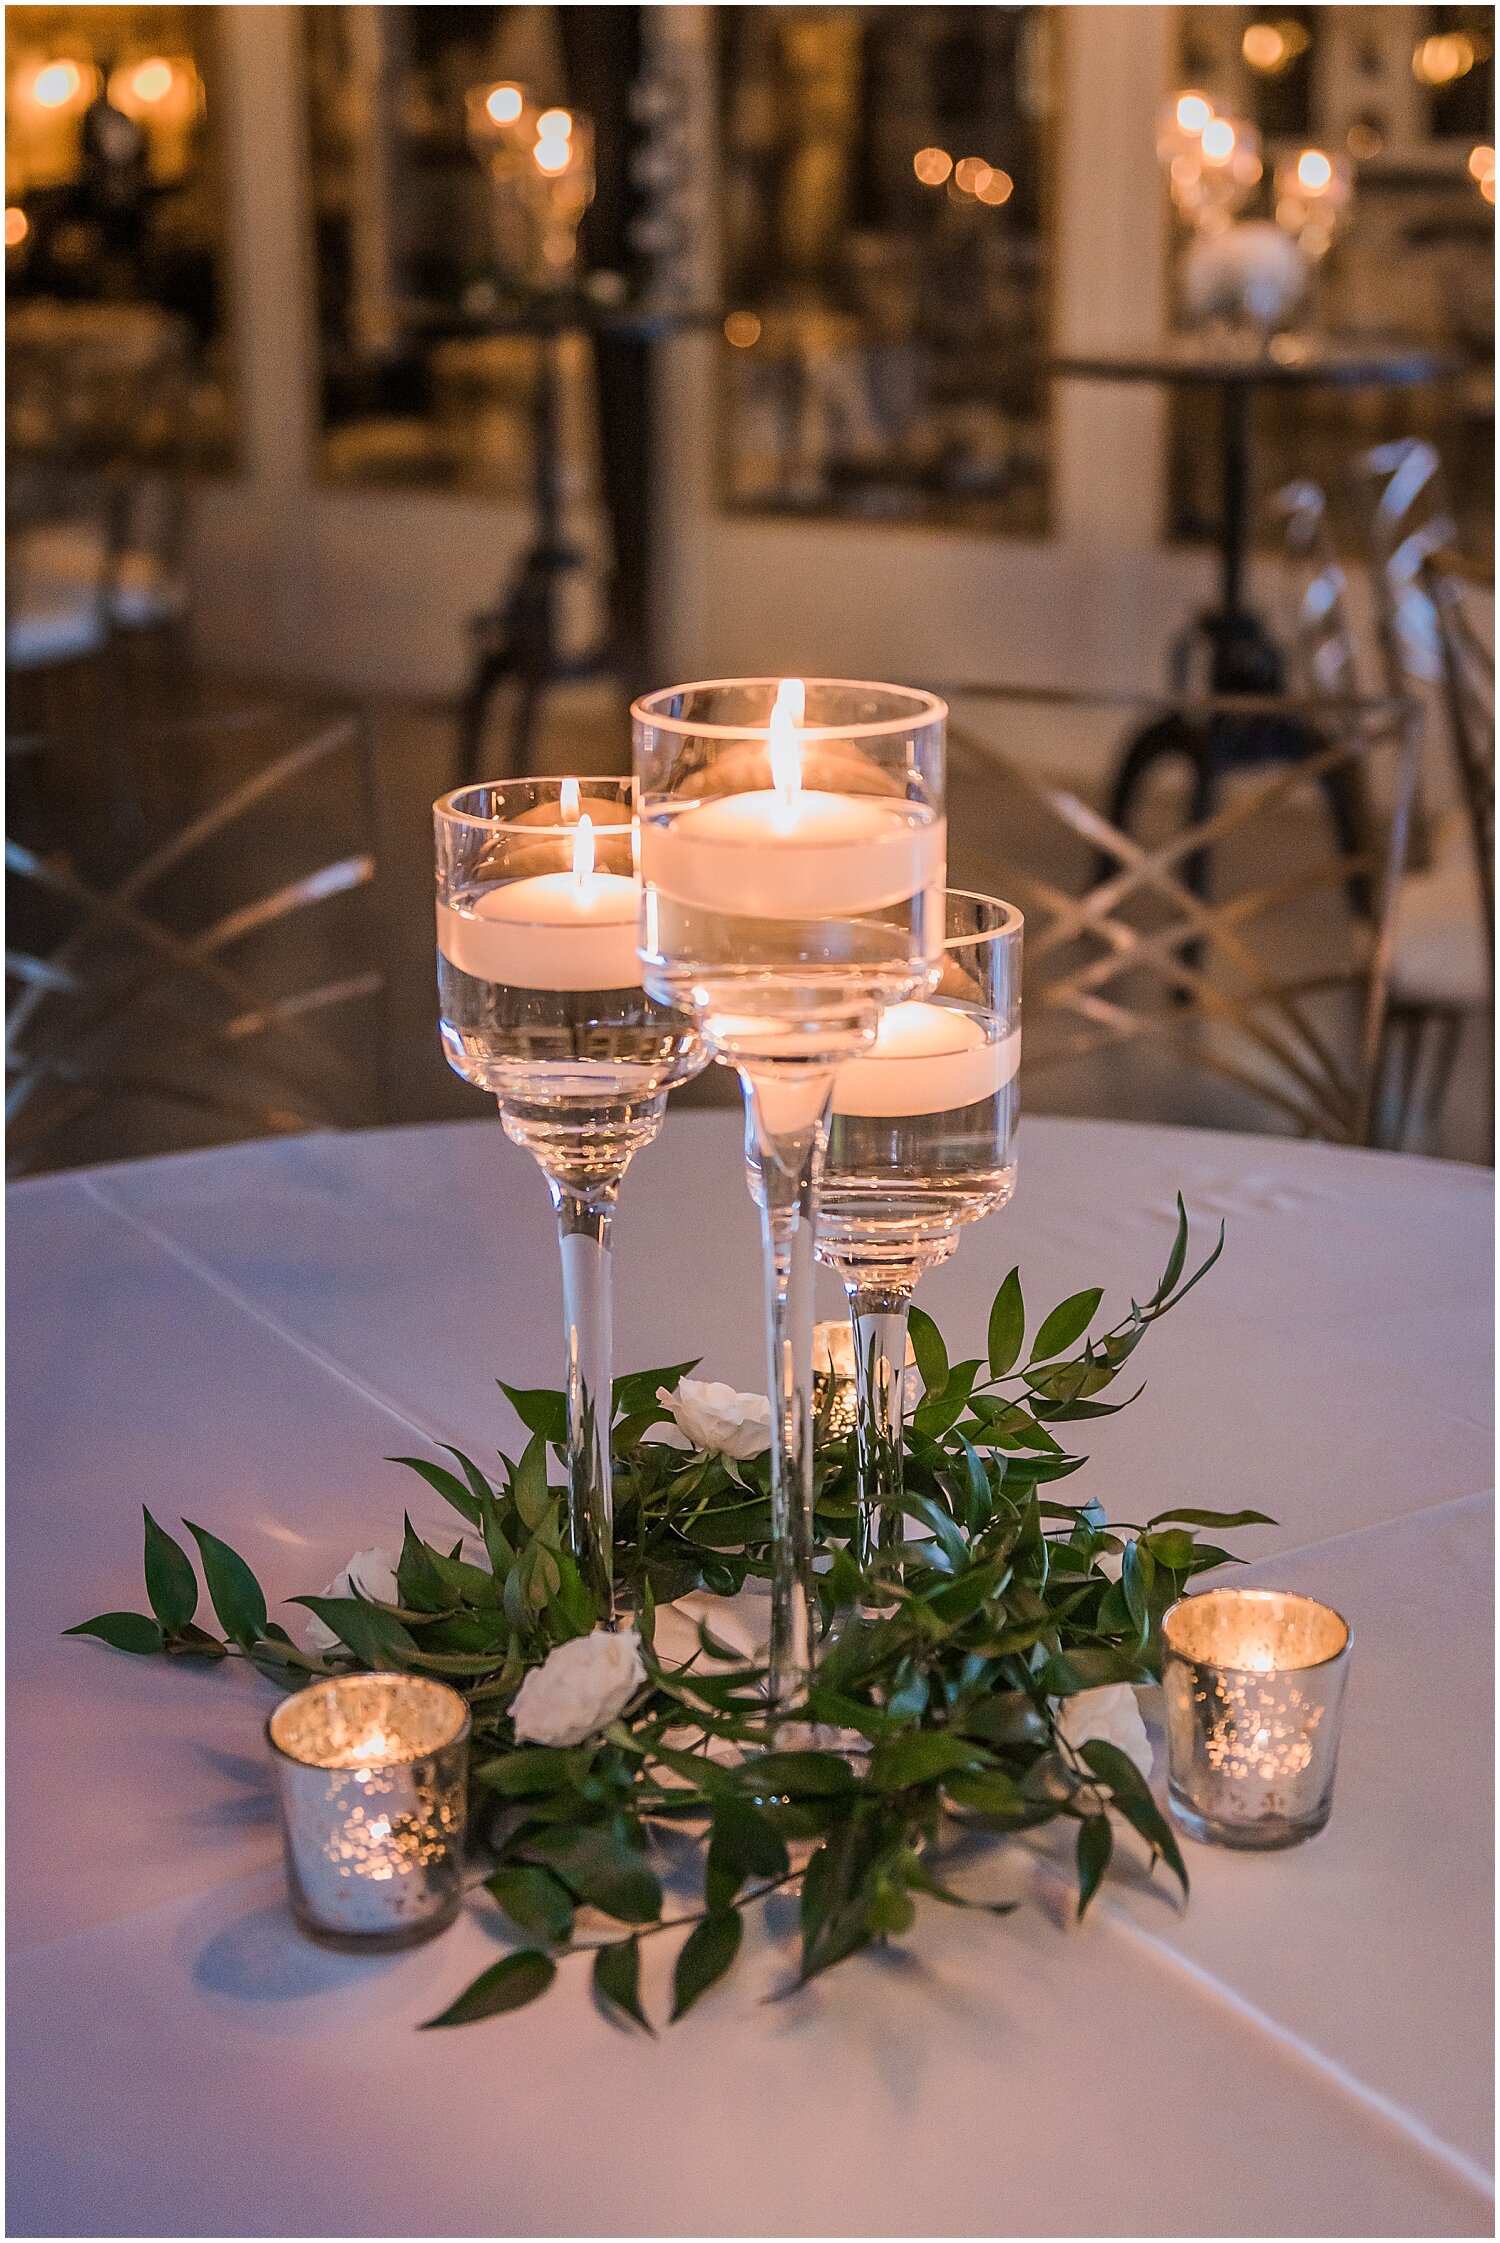  romantic wedding centerpieces with candles and greenery 